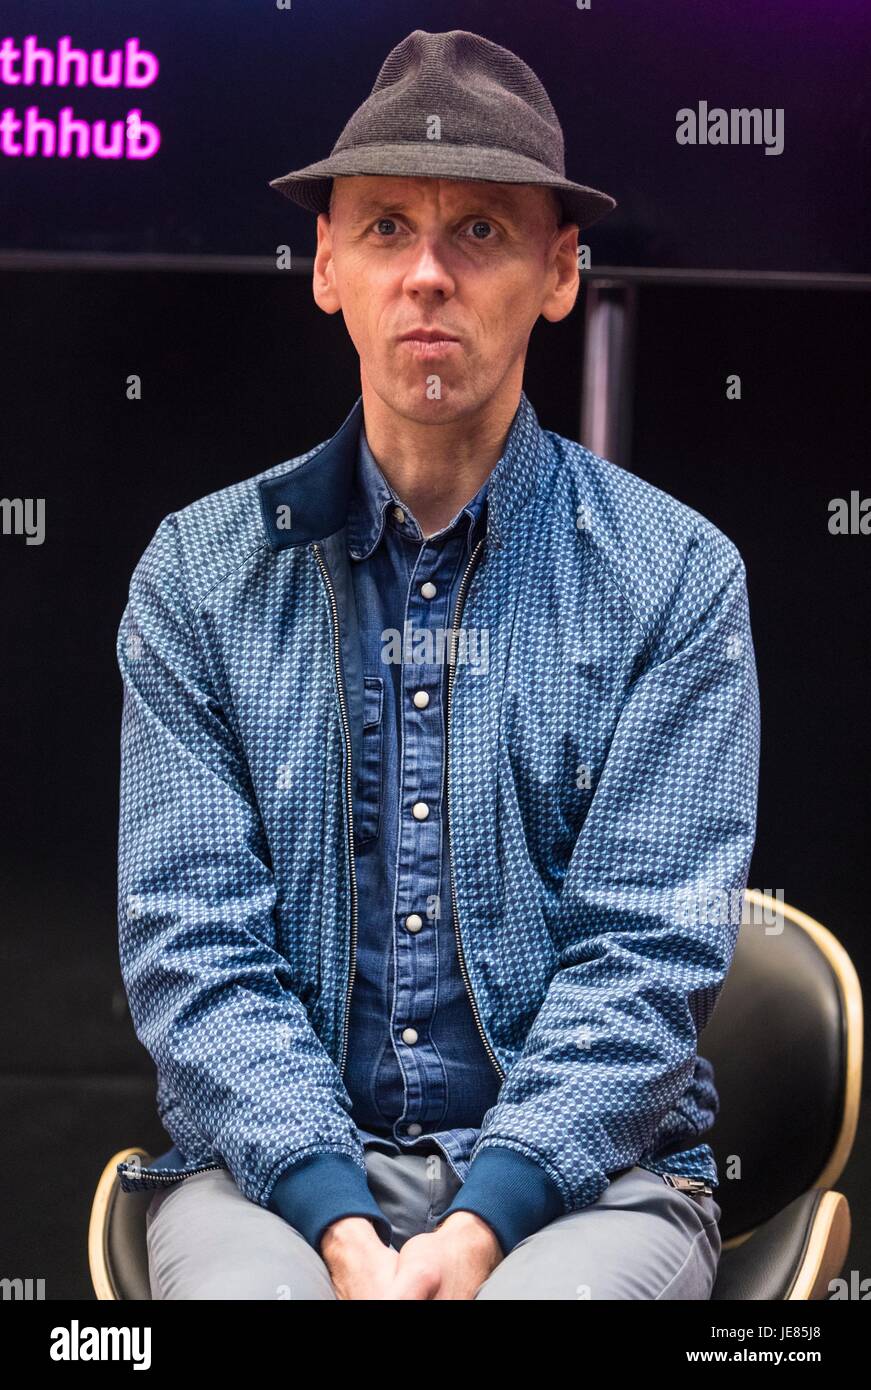 Edinburgh, UK. 23rd June, 2017. Ewen Bremner appears at the Edinburgh International Film Festival to share his experiences of the film industry with young people. Credit: Rich Dyson/Alamy Live News Stock Photo